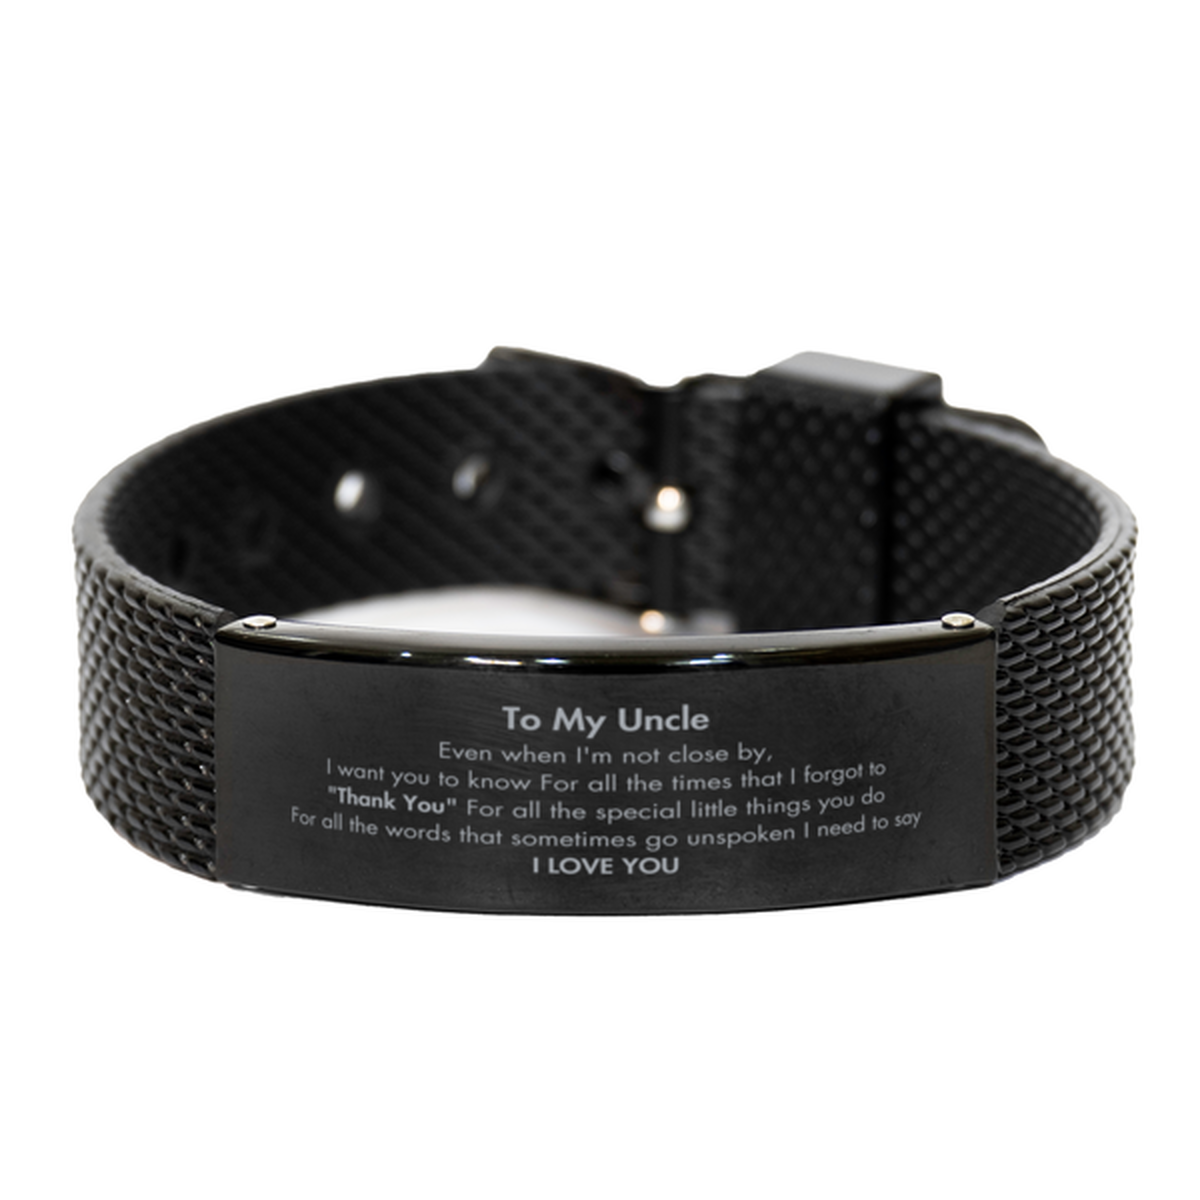 Thank You Gifts for Uncle, Keepsake Black Shark Mesh Bracelet Gifts for Uncle Birthday Mother's day Father's Day Uncle For all the words That sometimes go unspoken I need to say I LOVE YOU